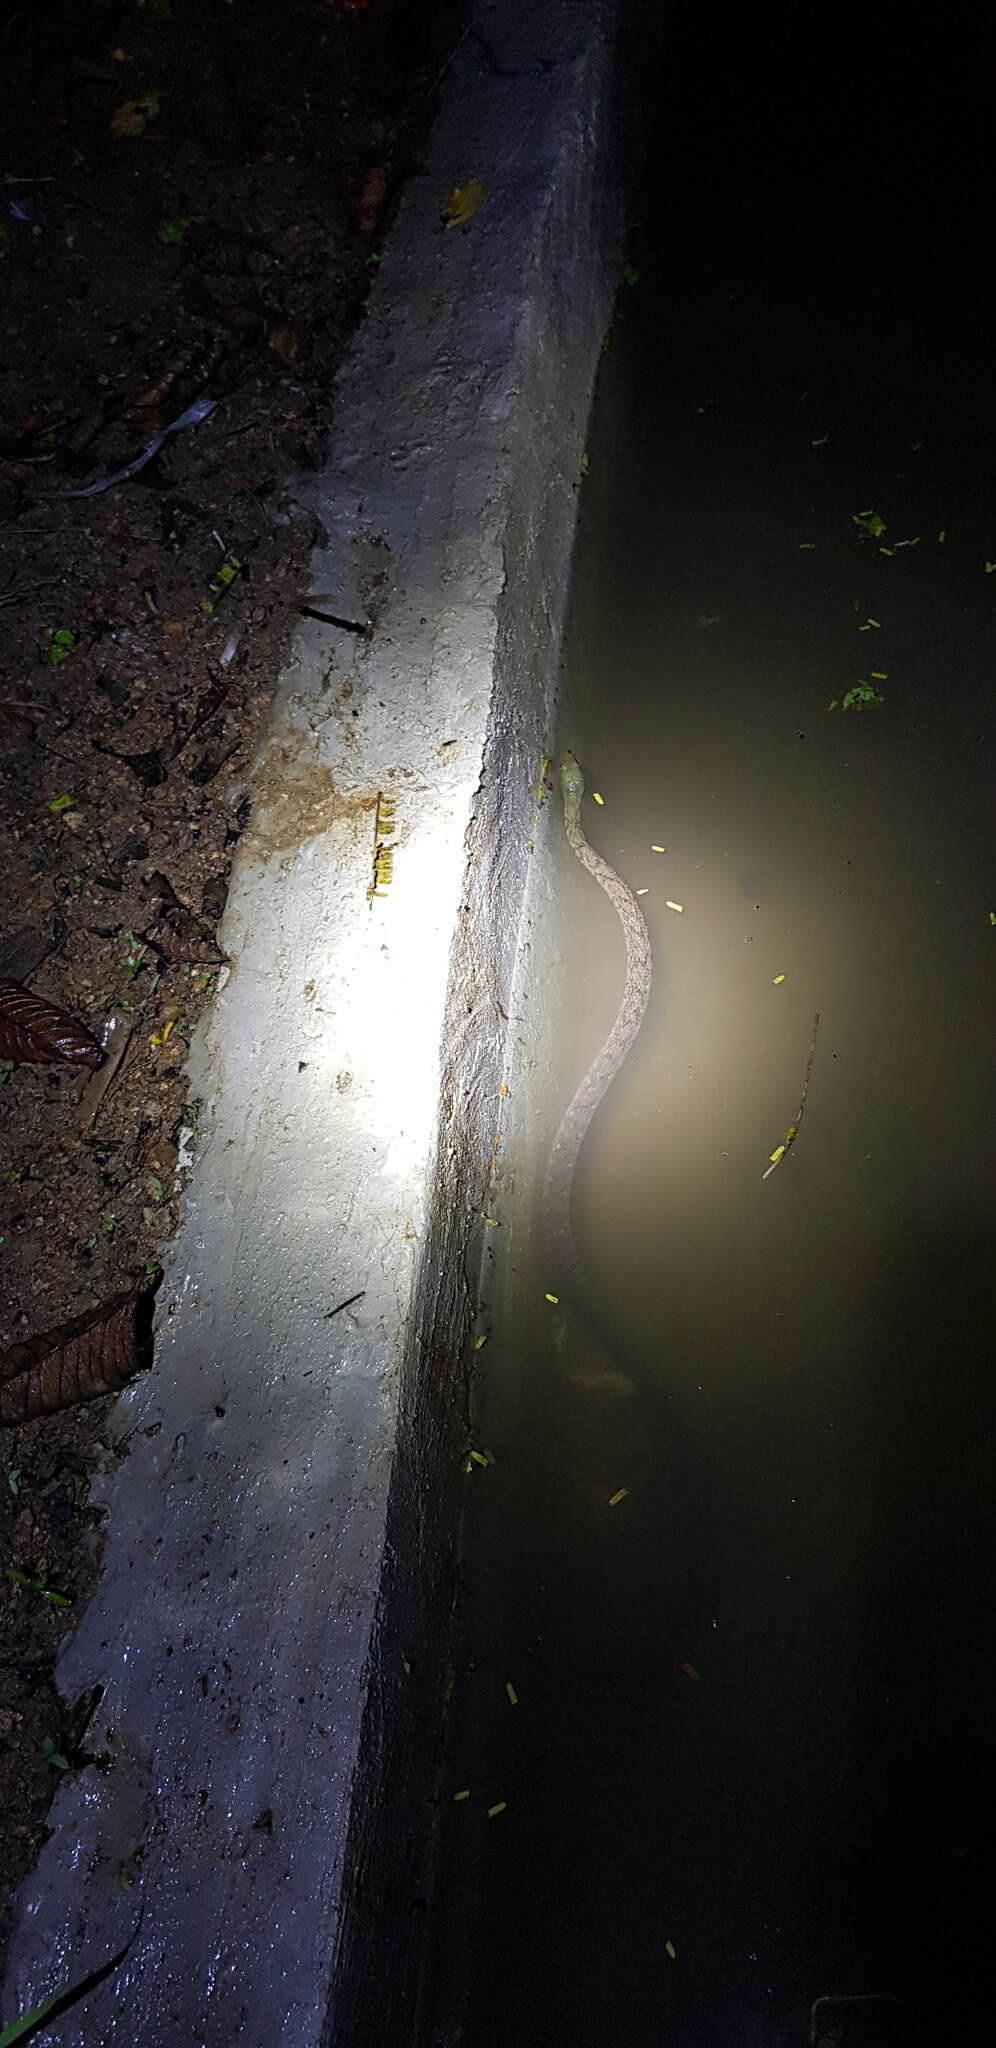 Image of Red-sided Keelback Water Snake